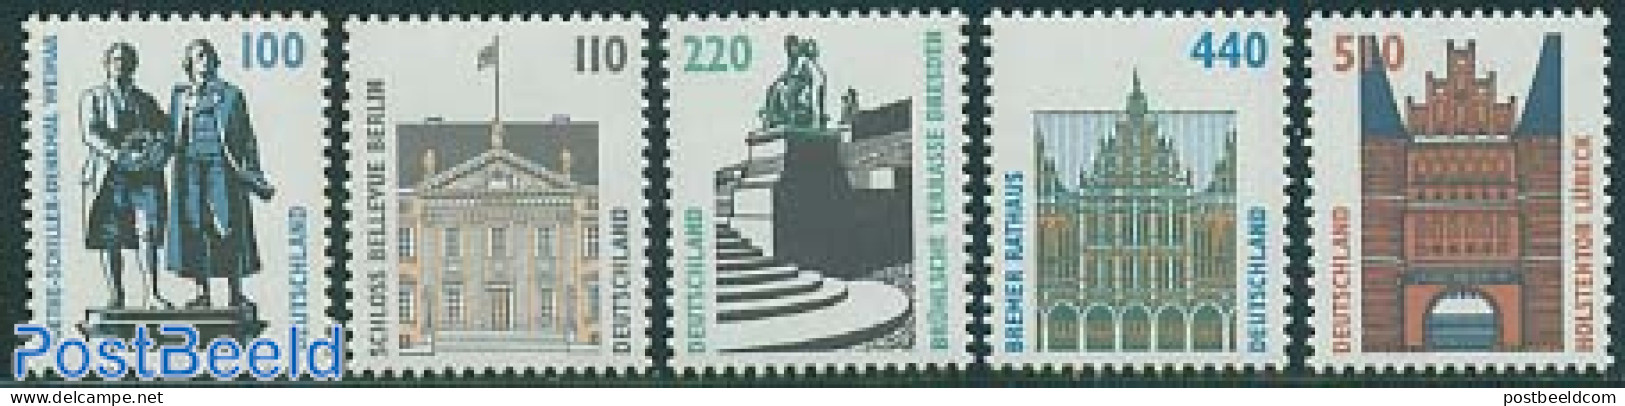 Germany, Federal Republic 1997 Definitives 5v, Unused (hinged), Art - Castles & Fortifications - Sculpture - Nuevos